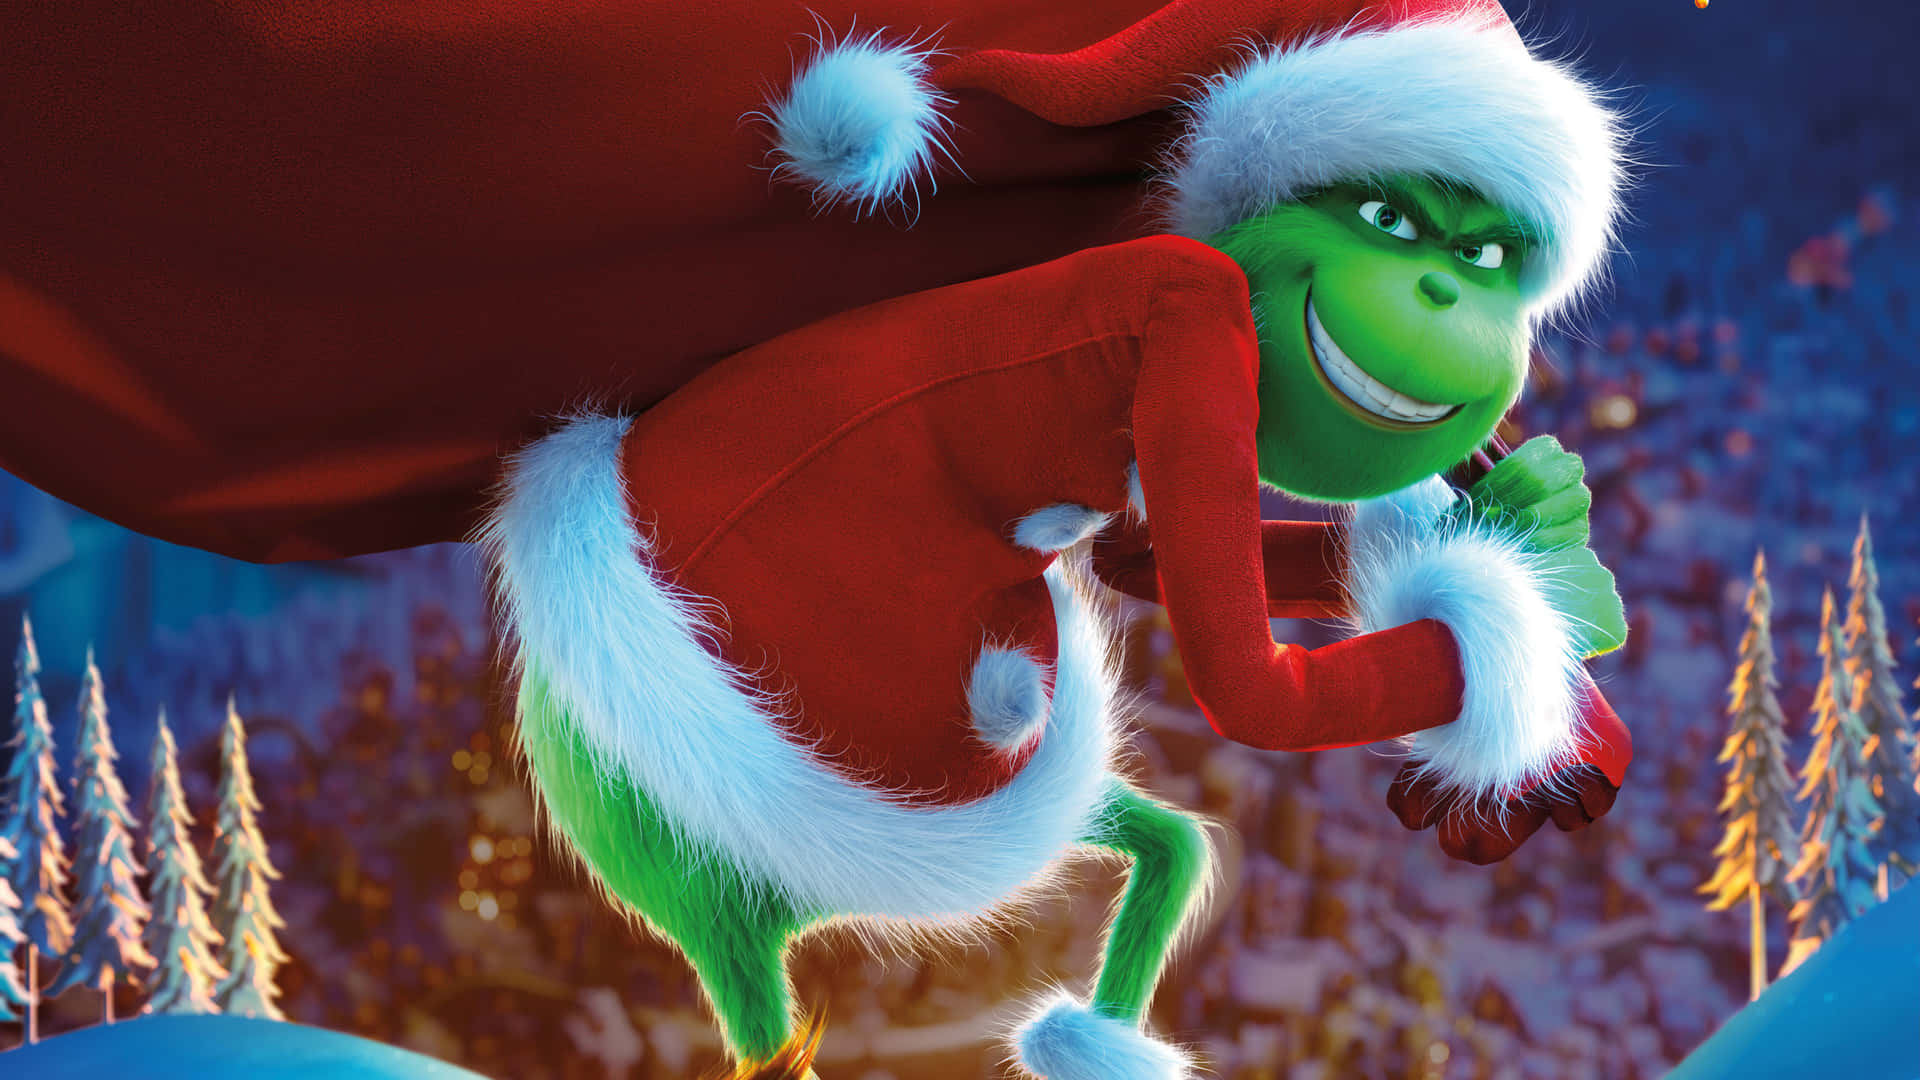 Spread the Christmas spirit with this merry Cute Grinch!